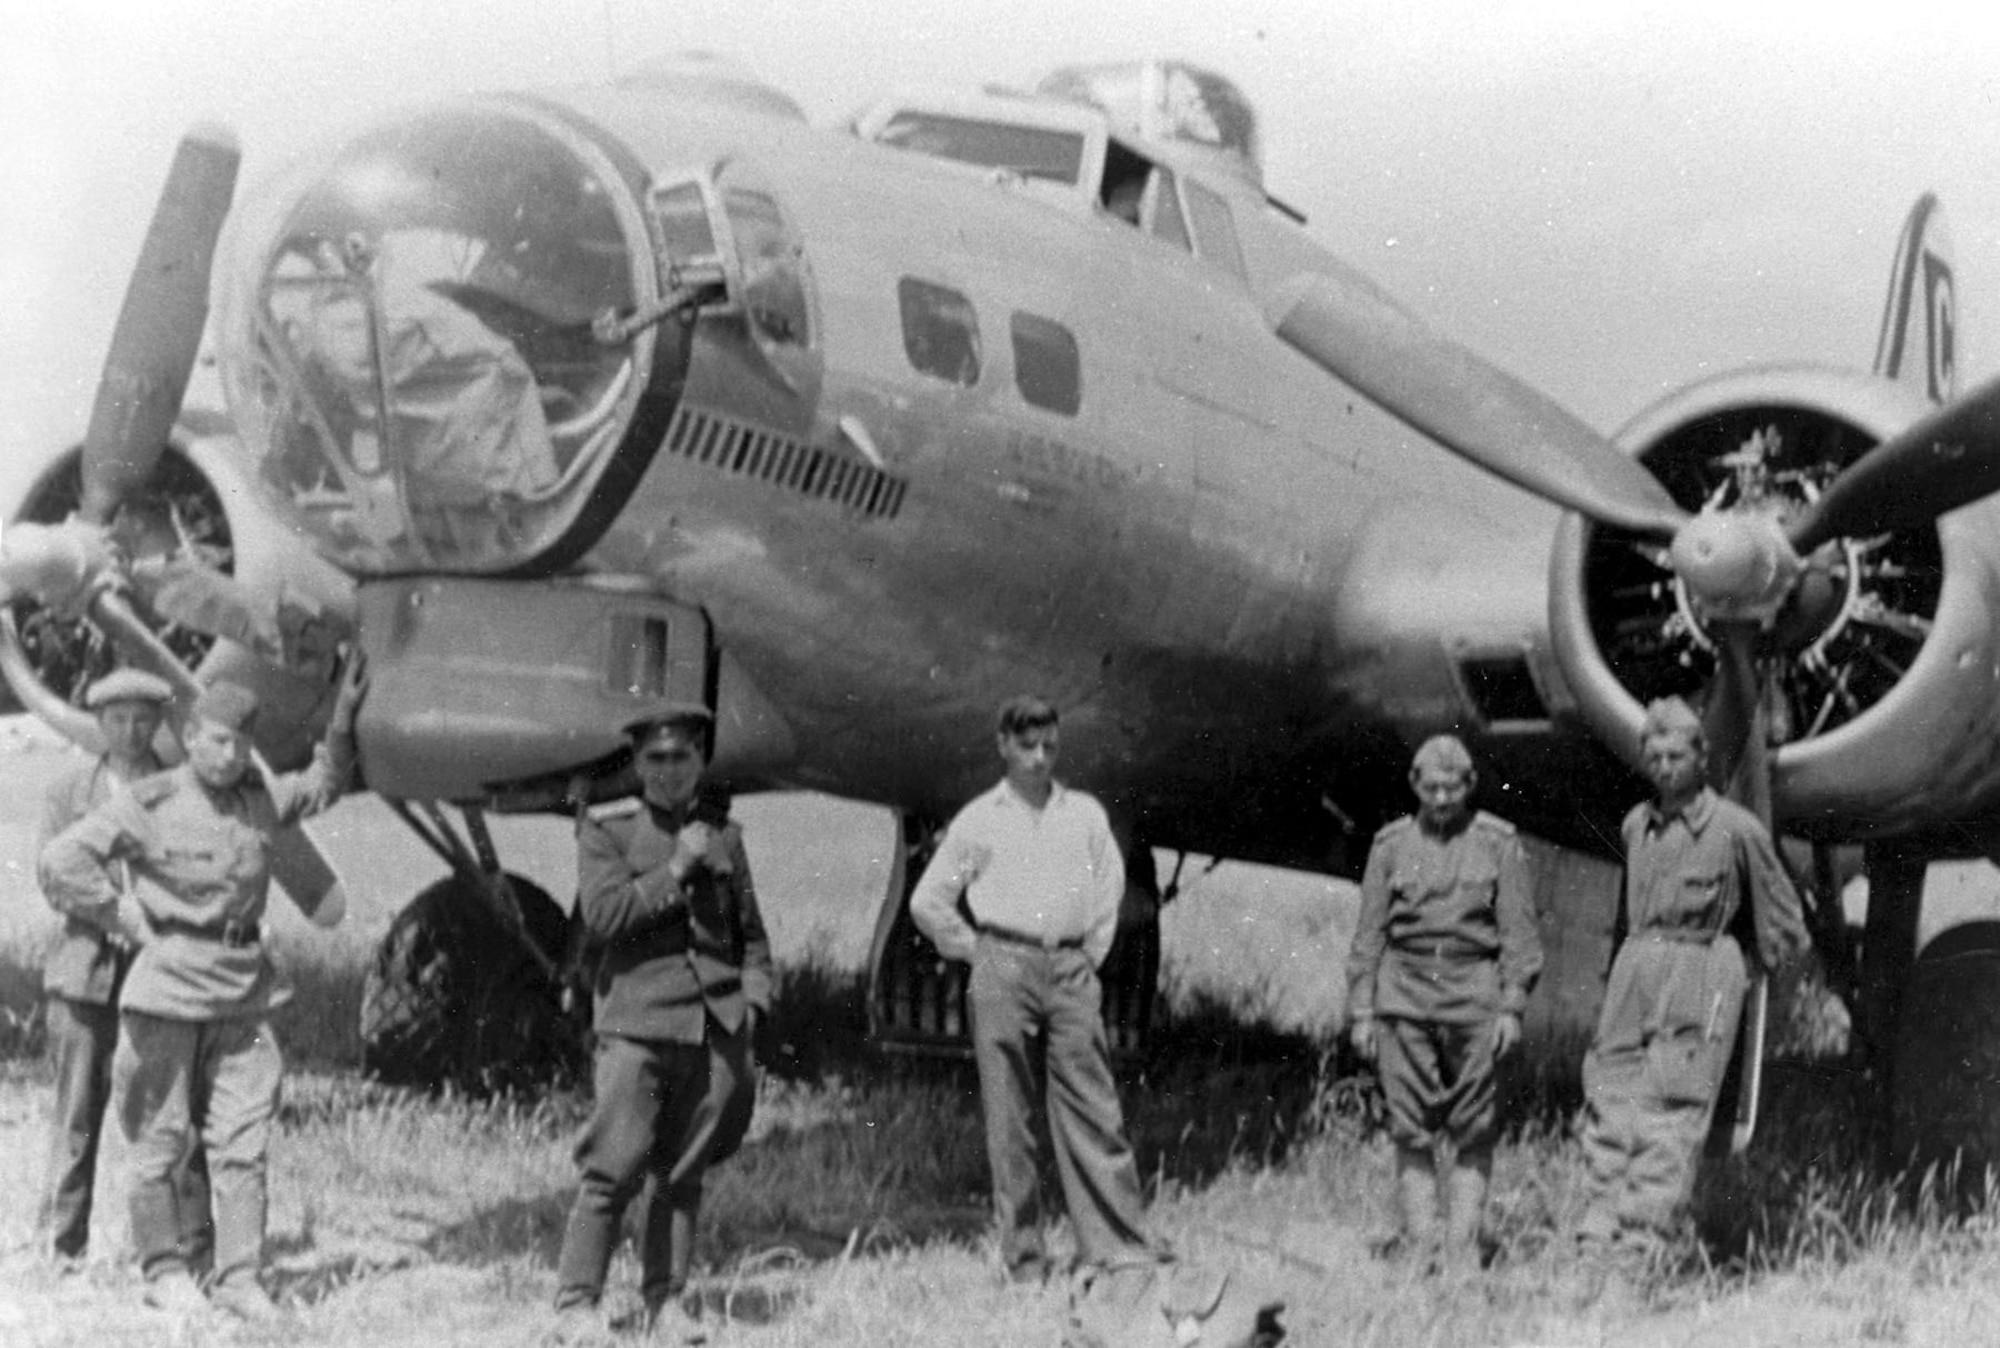 Badly damaged B-17 bomber and Russian soldiers in Poltava, Russia, on June 22, 1944. (U.S. Air Force photo)